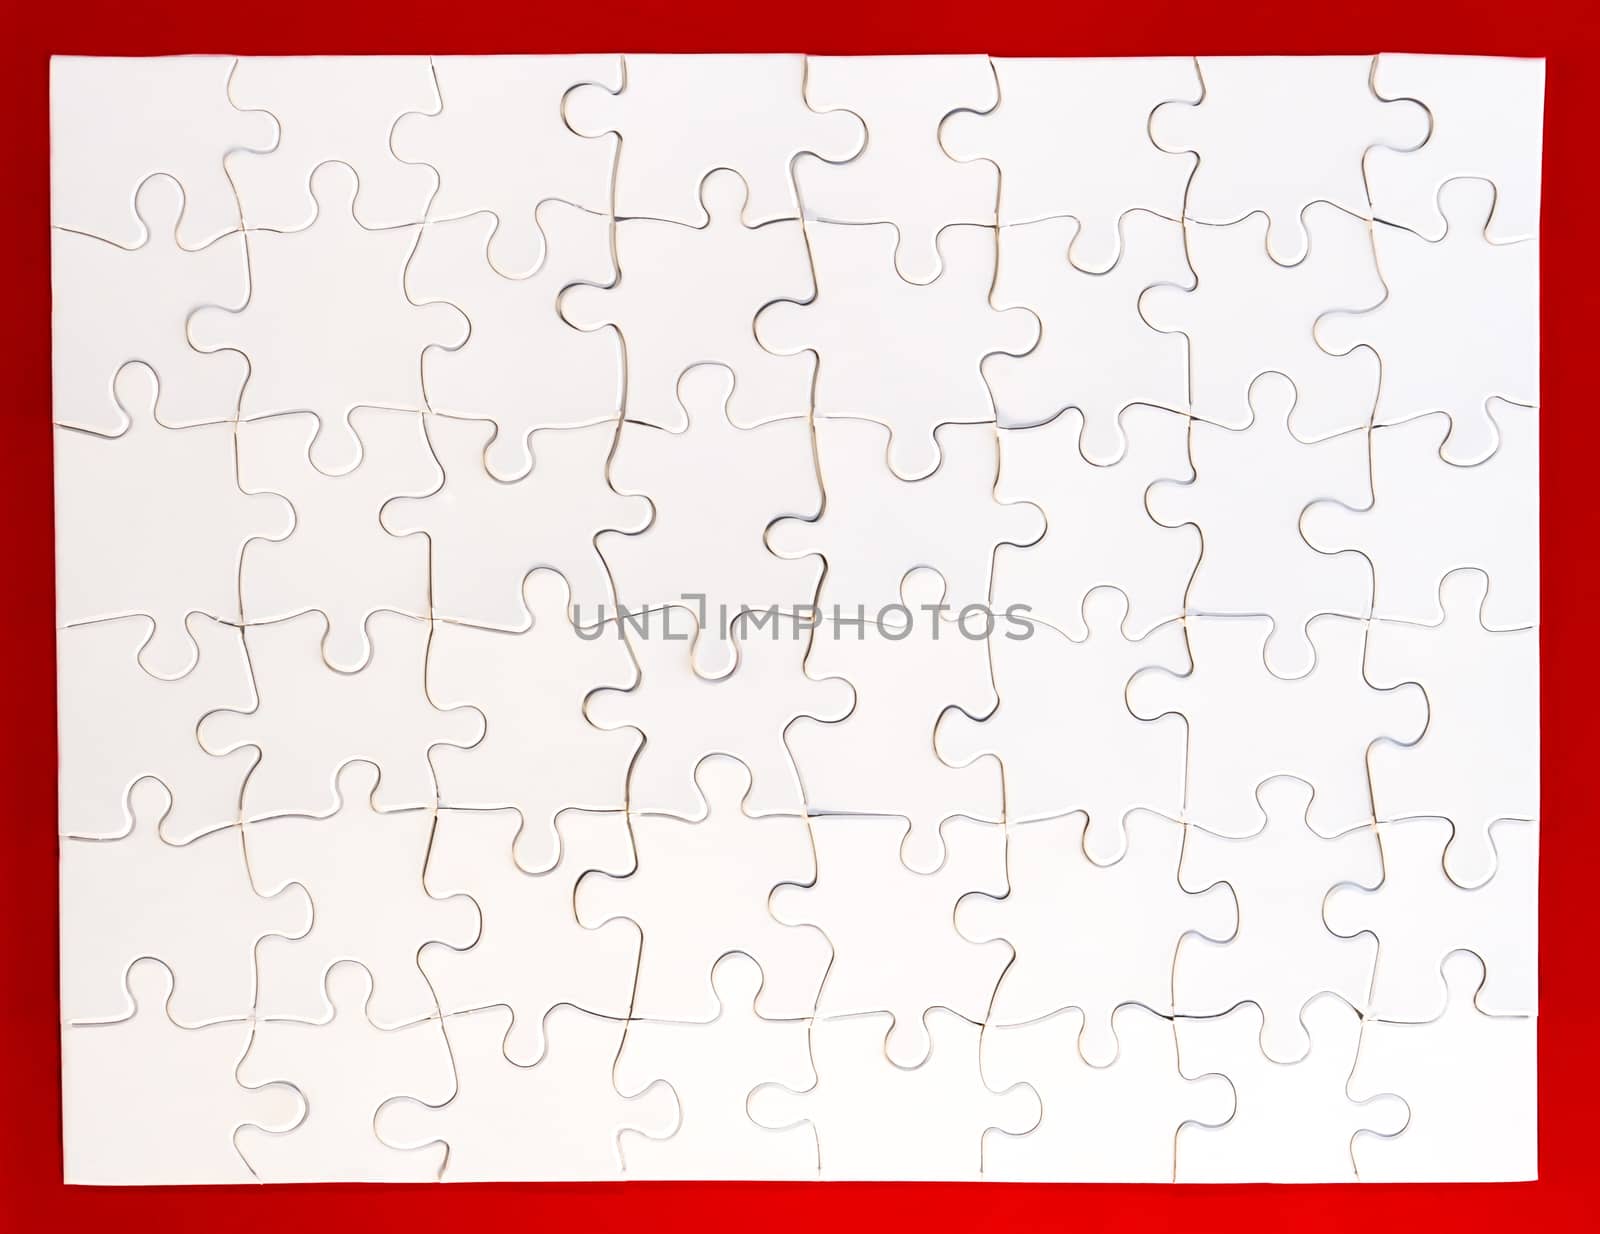 Completed White Jigsaw Puzzle by krisblackphotography